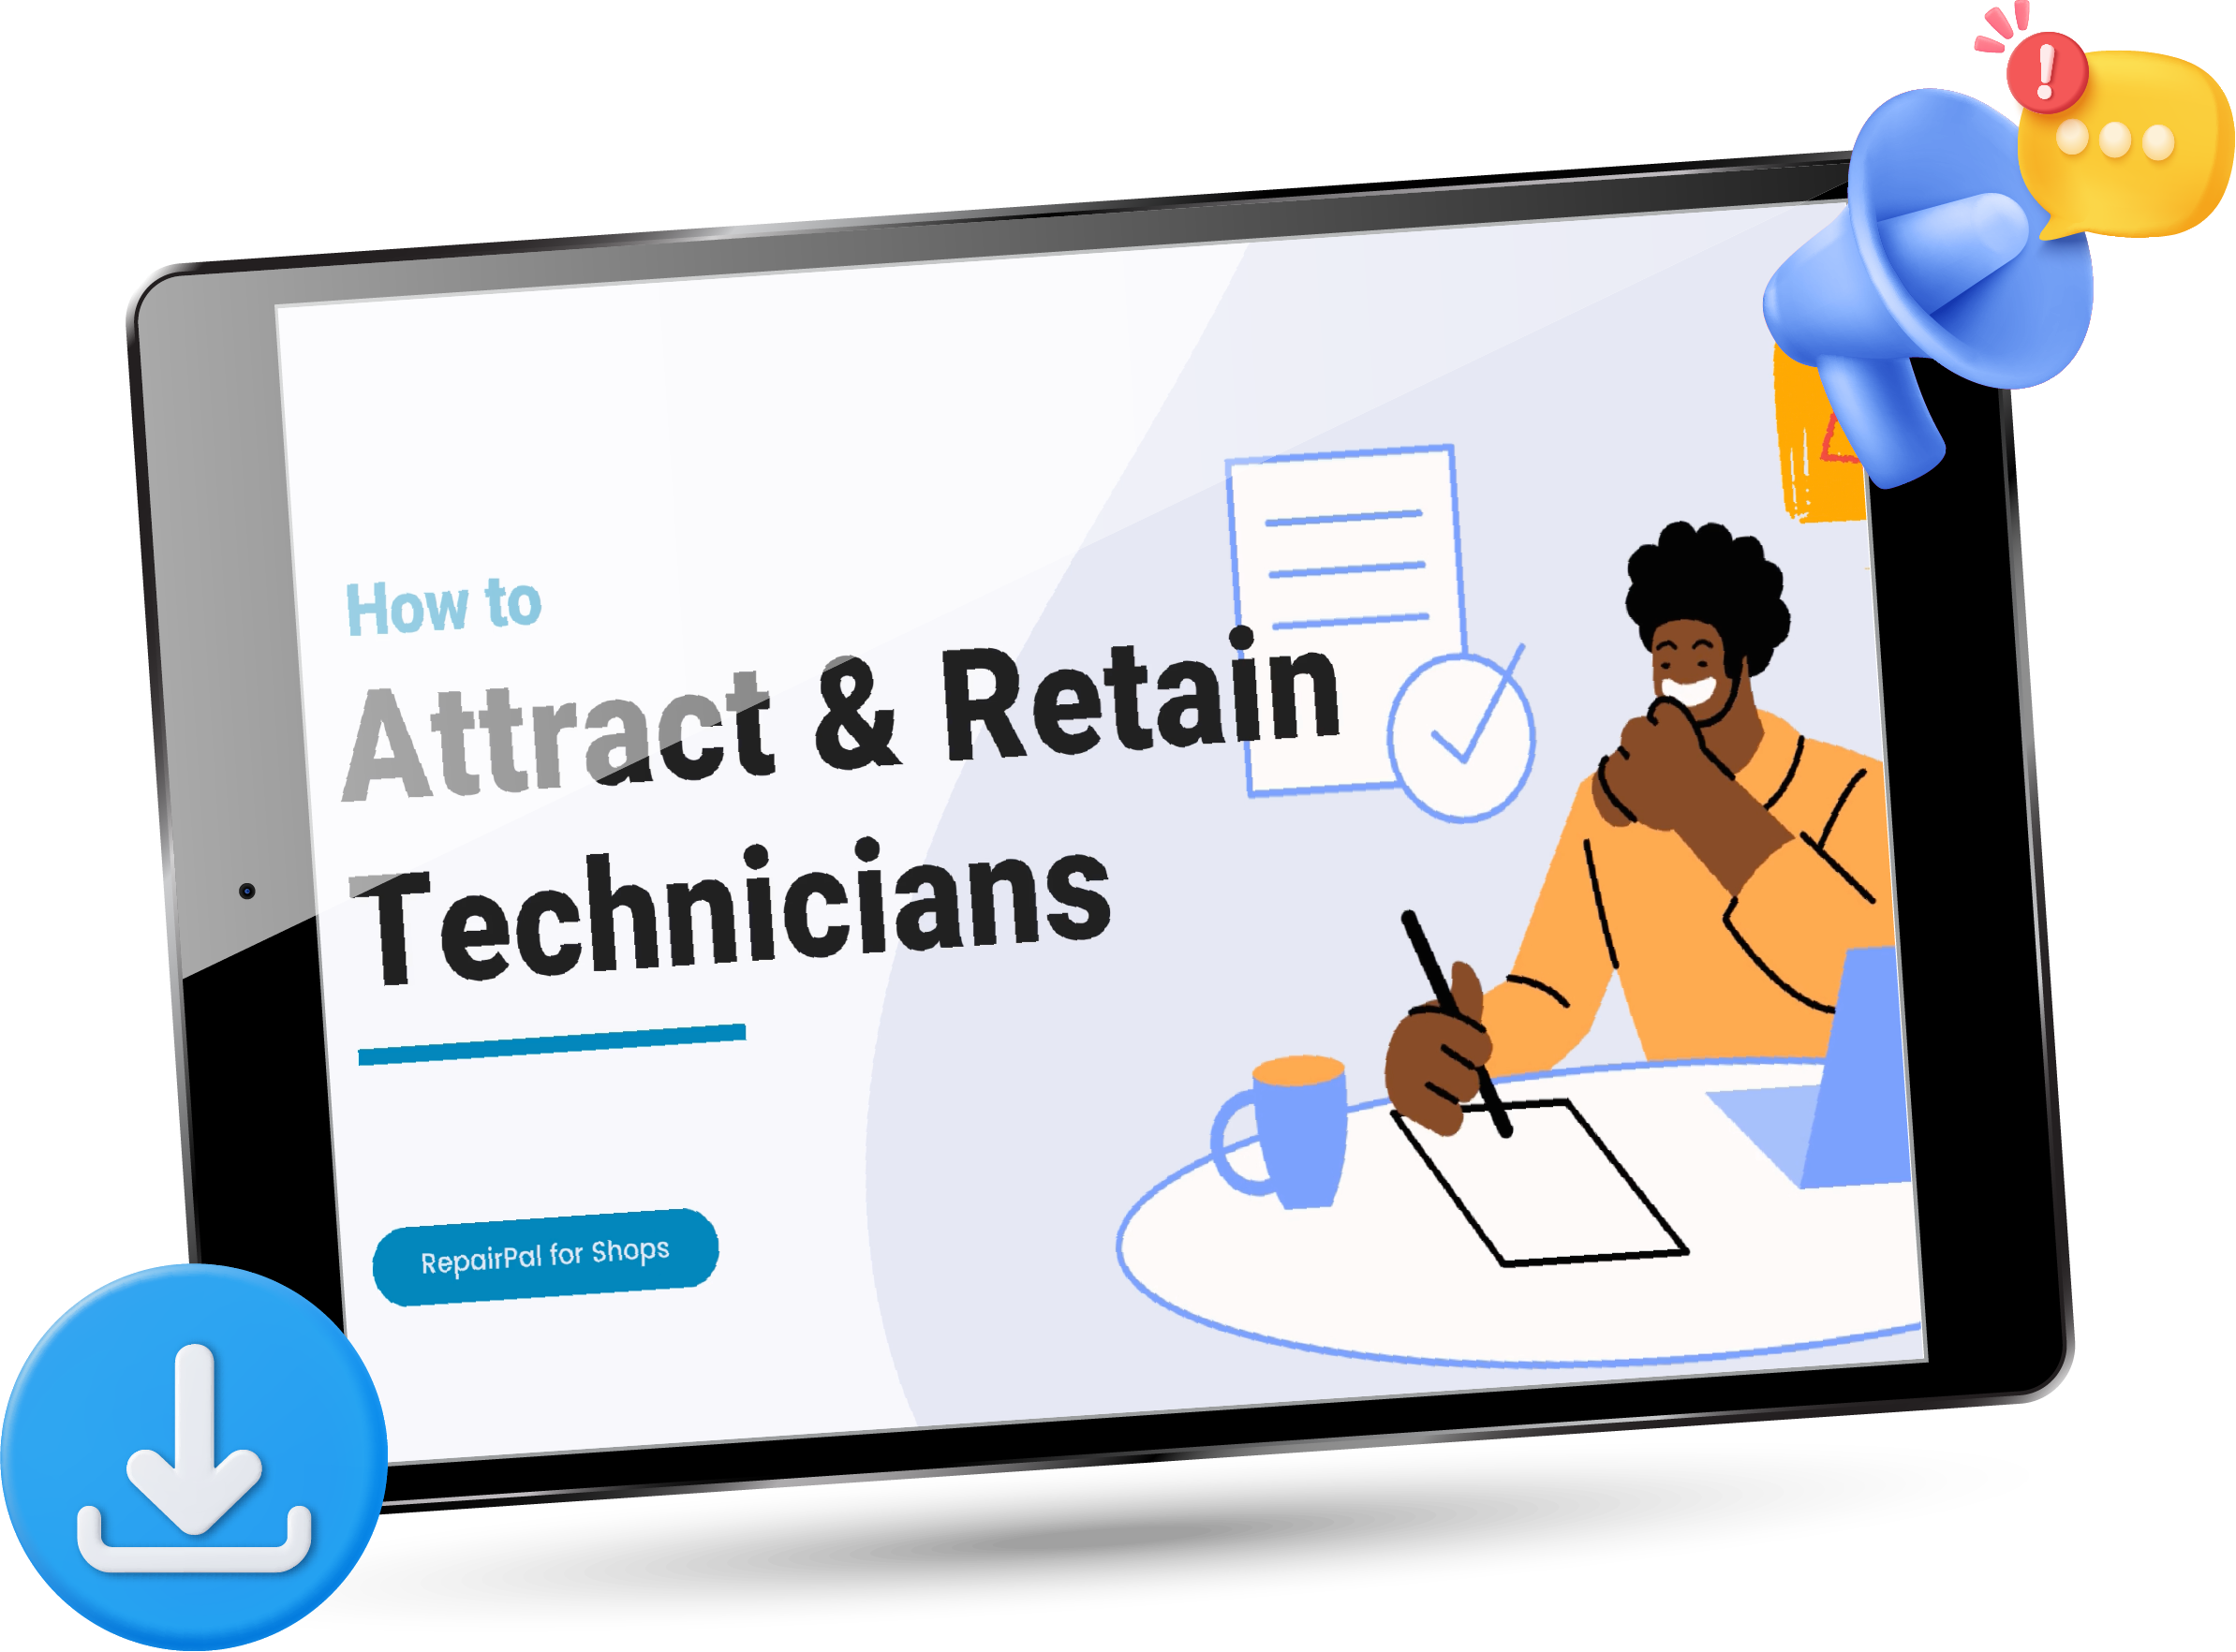 How to Attract & Retain Technicians